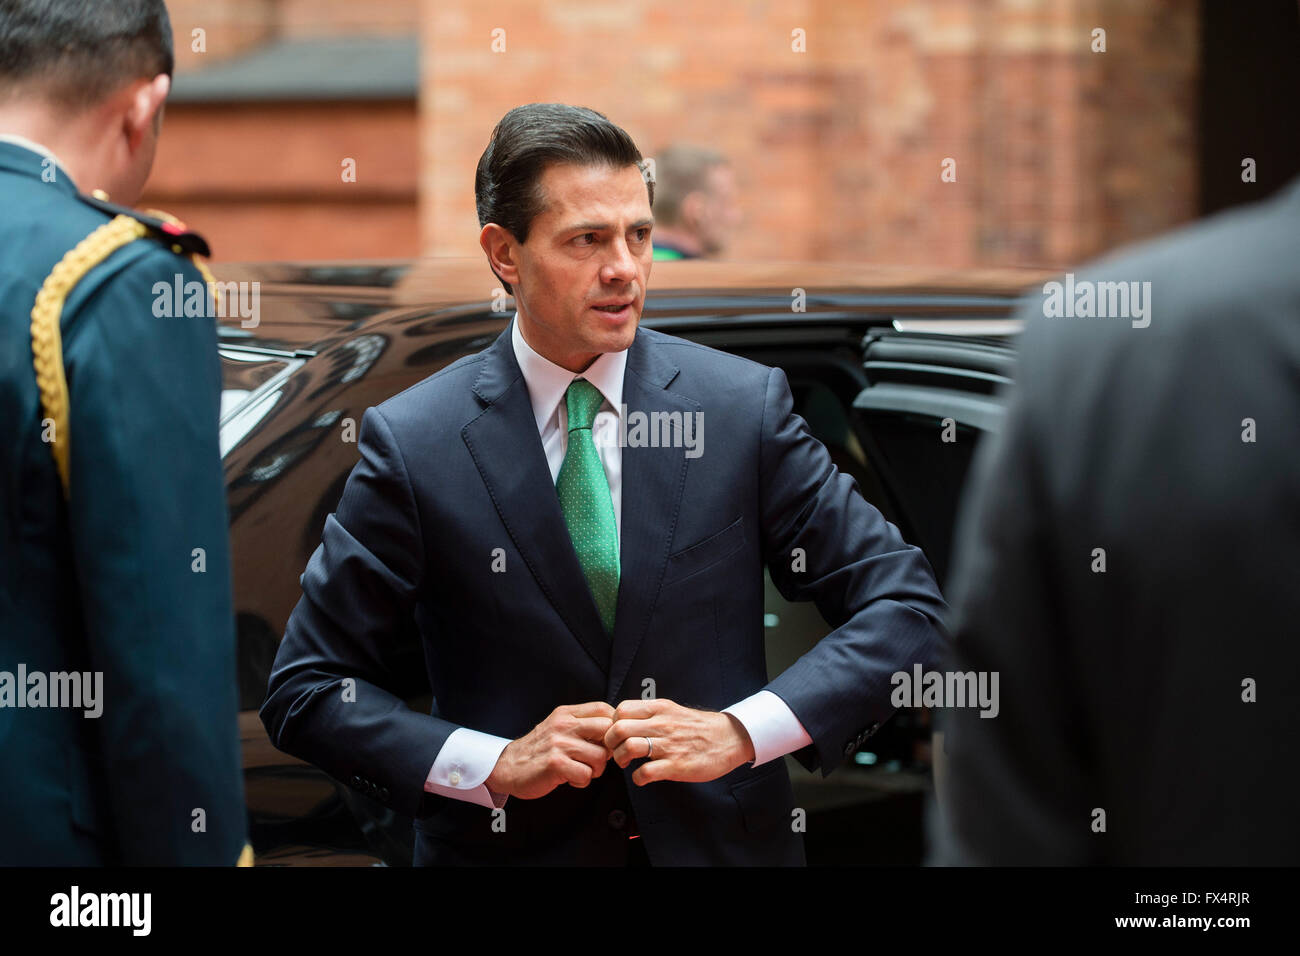 Berlin, Germany. 11th Apr, 2016. Mexican President Enrique Pena Nieto arrives to meet the Mayor of Berlin at City Hall in Berlin, Germany, 11 April 2016. Photo: GREGOR FISCHER/dpa/Alamy Live News Stock Photo